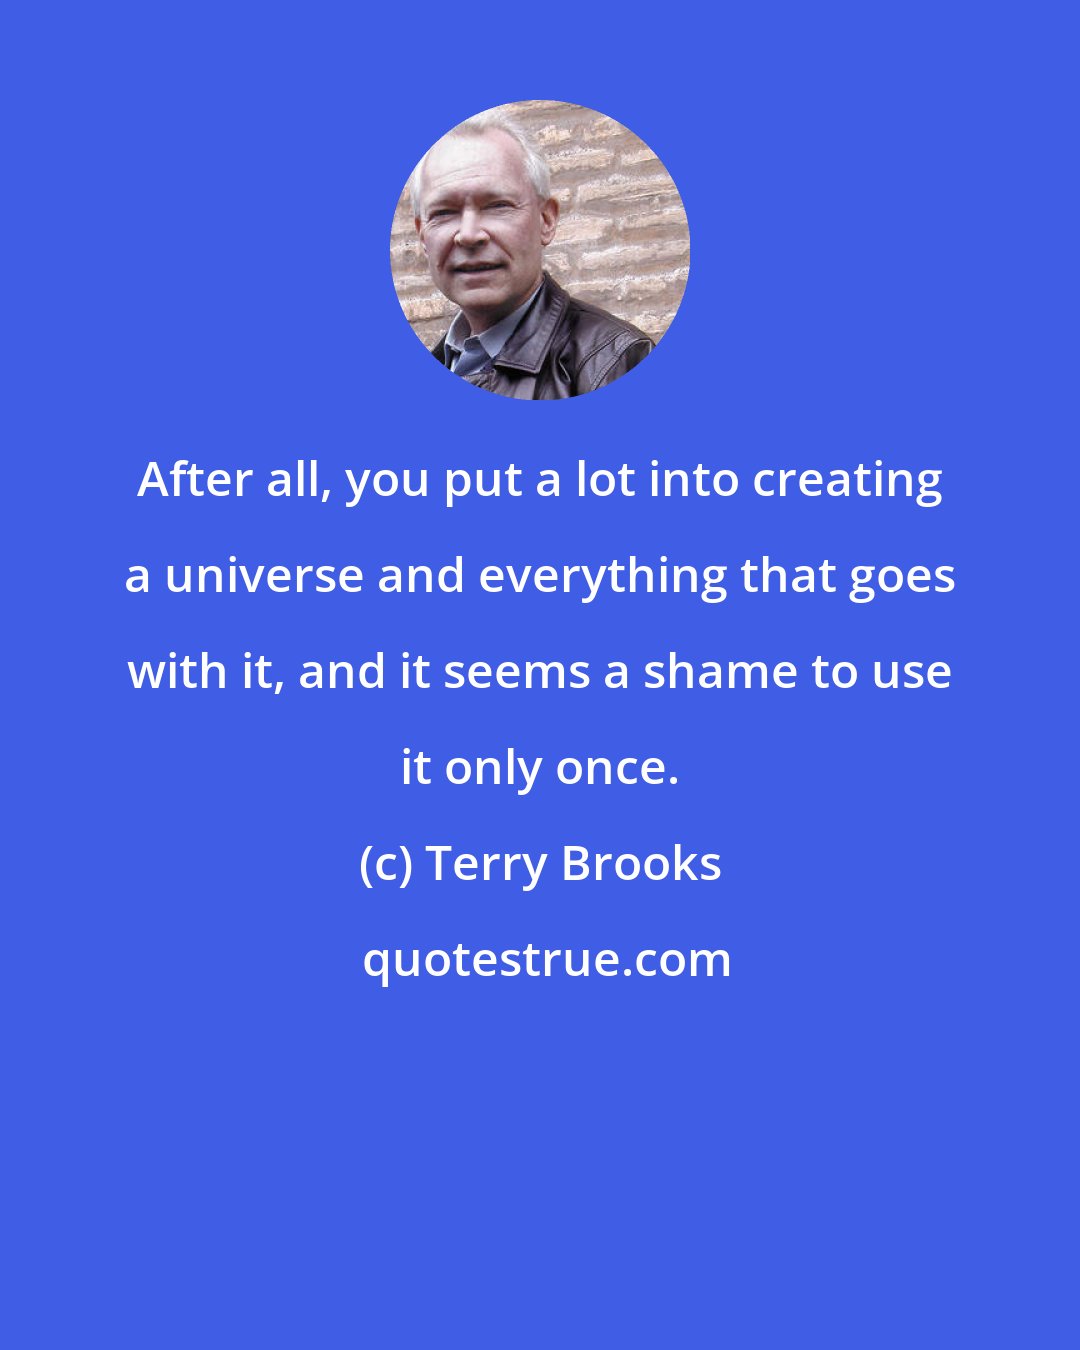 Terry Brooks: After all, you put a lot into creating a universe and everything that goes with it, and it seems a shame to use it only once.